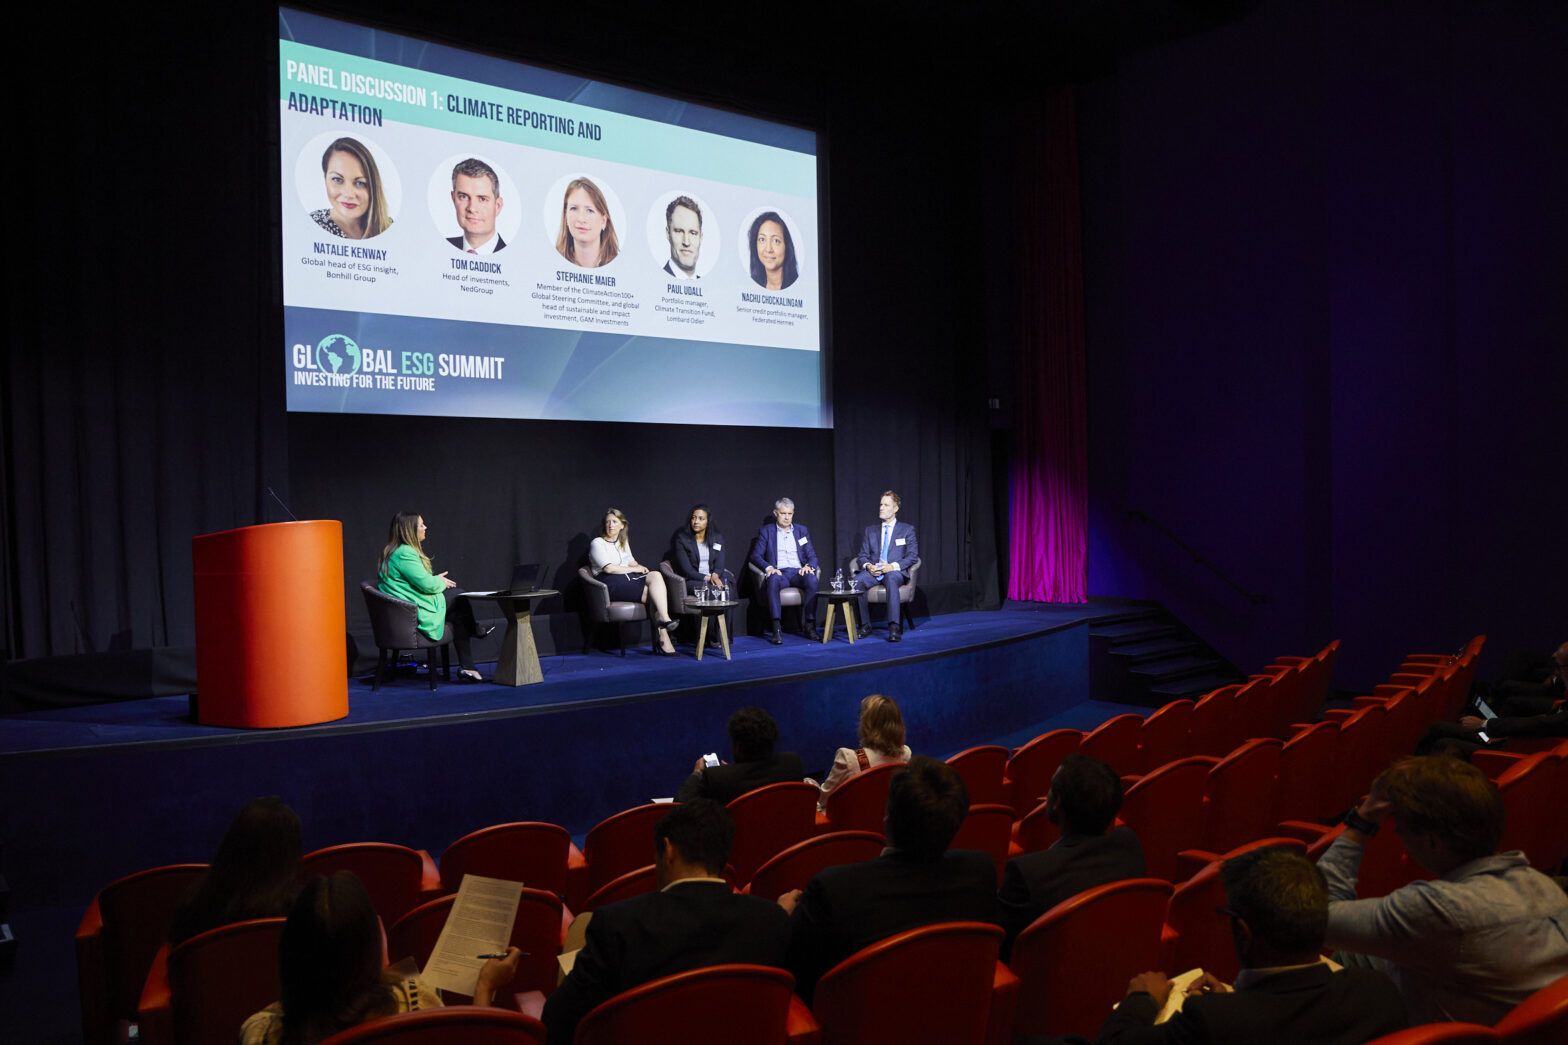 Global ESG Summit: Embrace the complexities of the transition